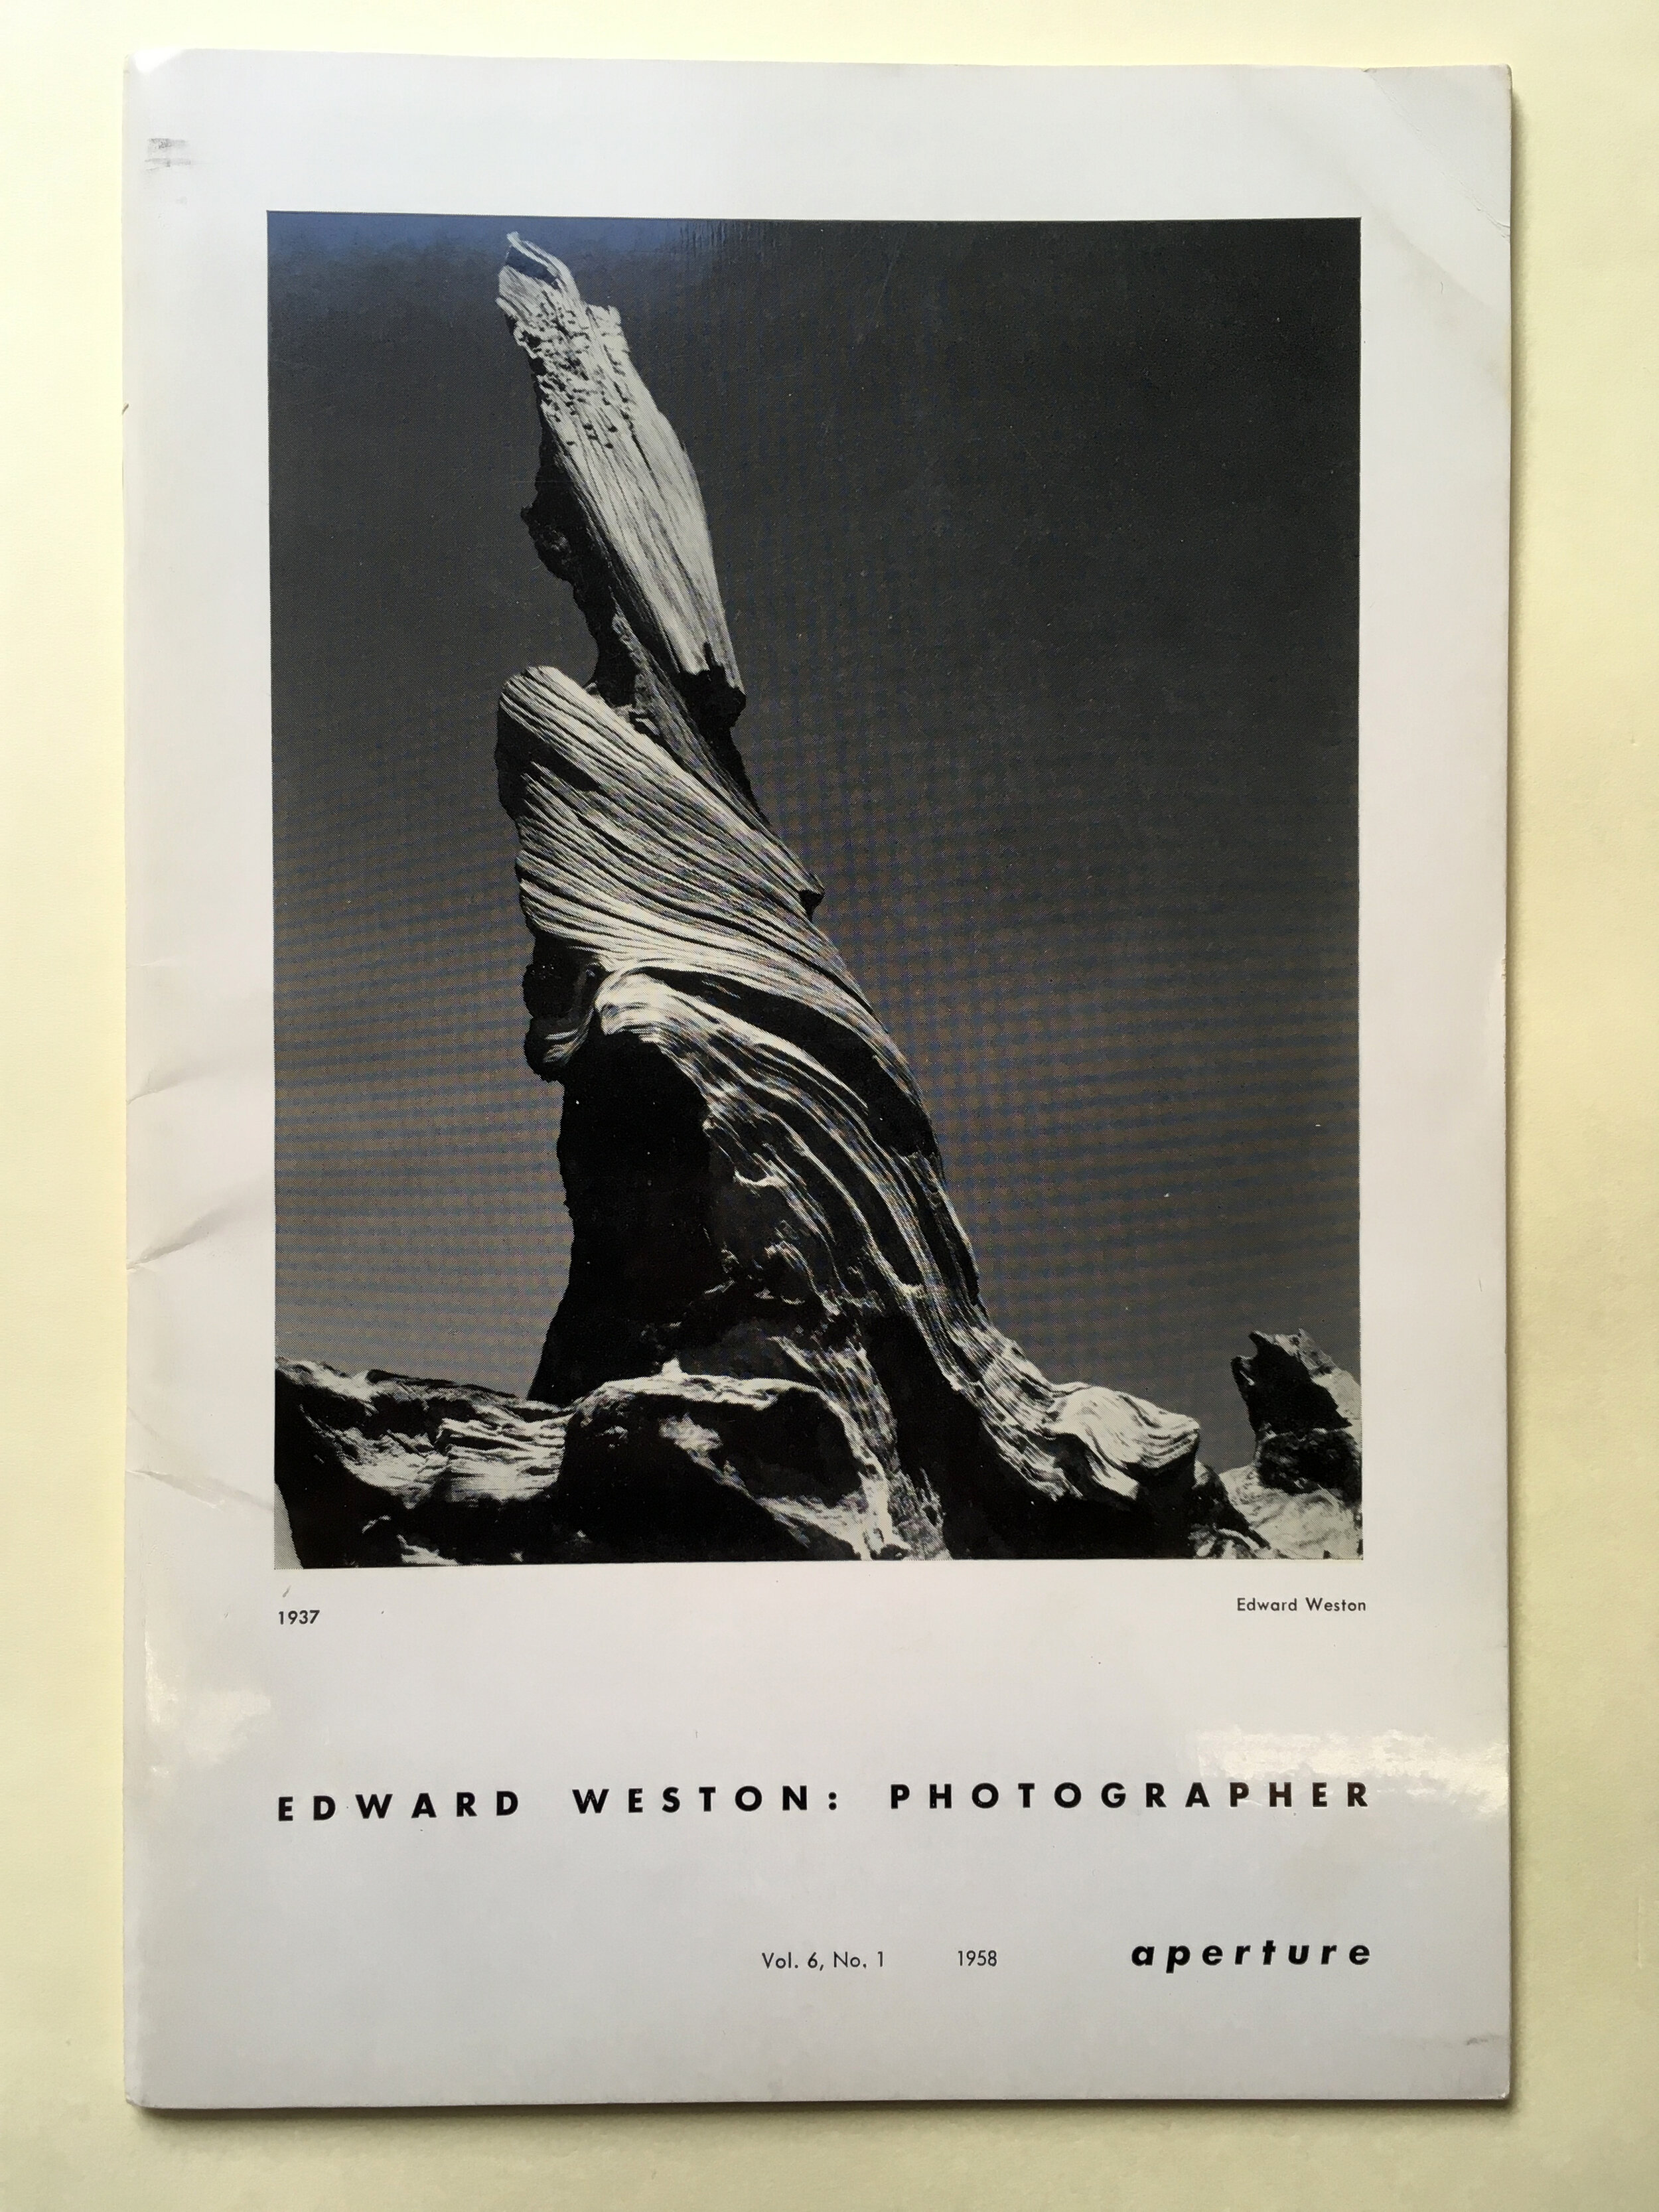    Aperture , Vol. 6, No. 1 (1958), Aperture Foundation Master Library Collection.  